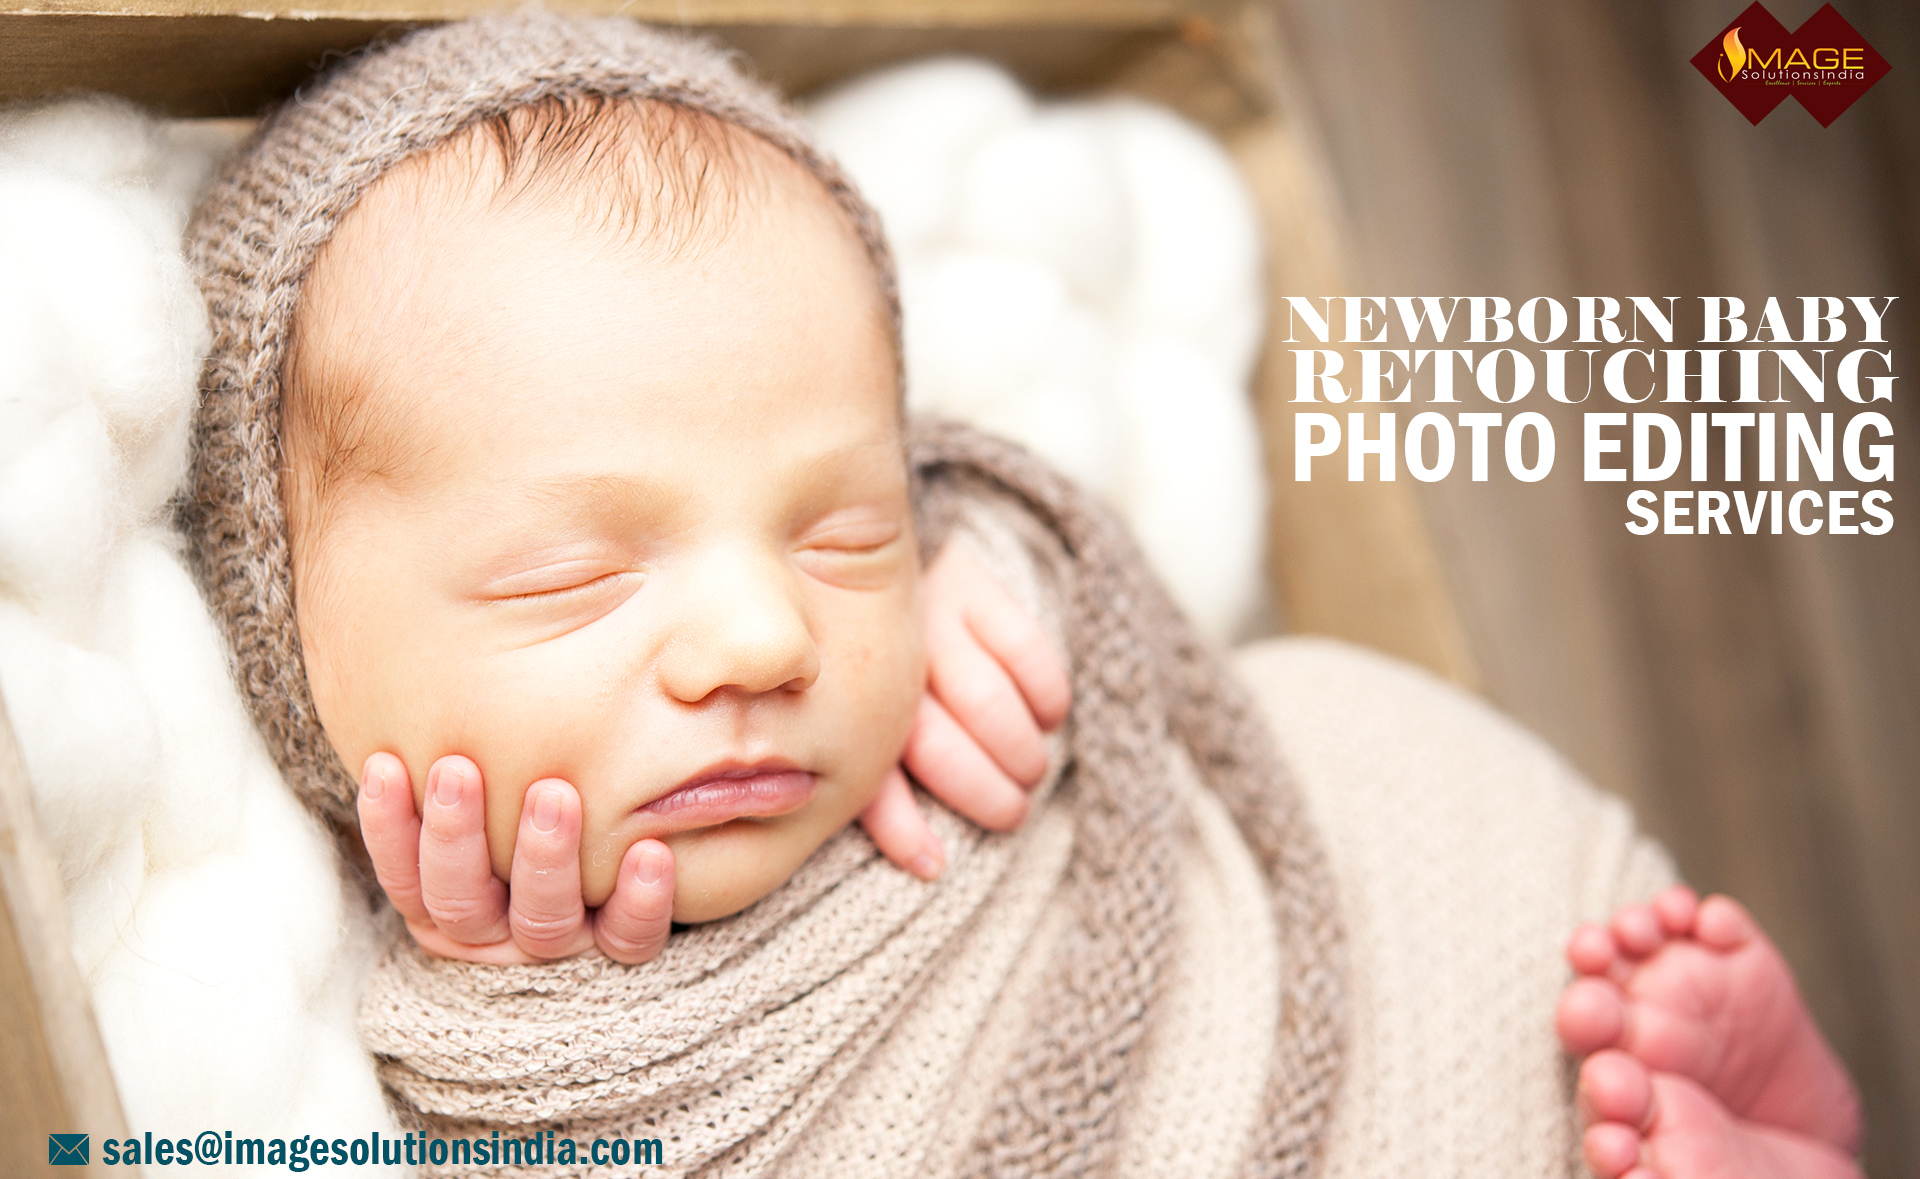 Baby Photo Retouching Services